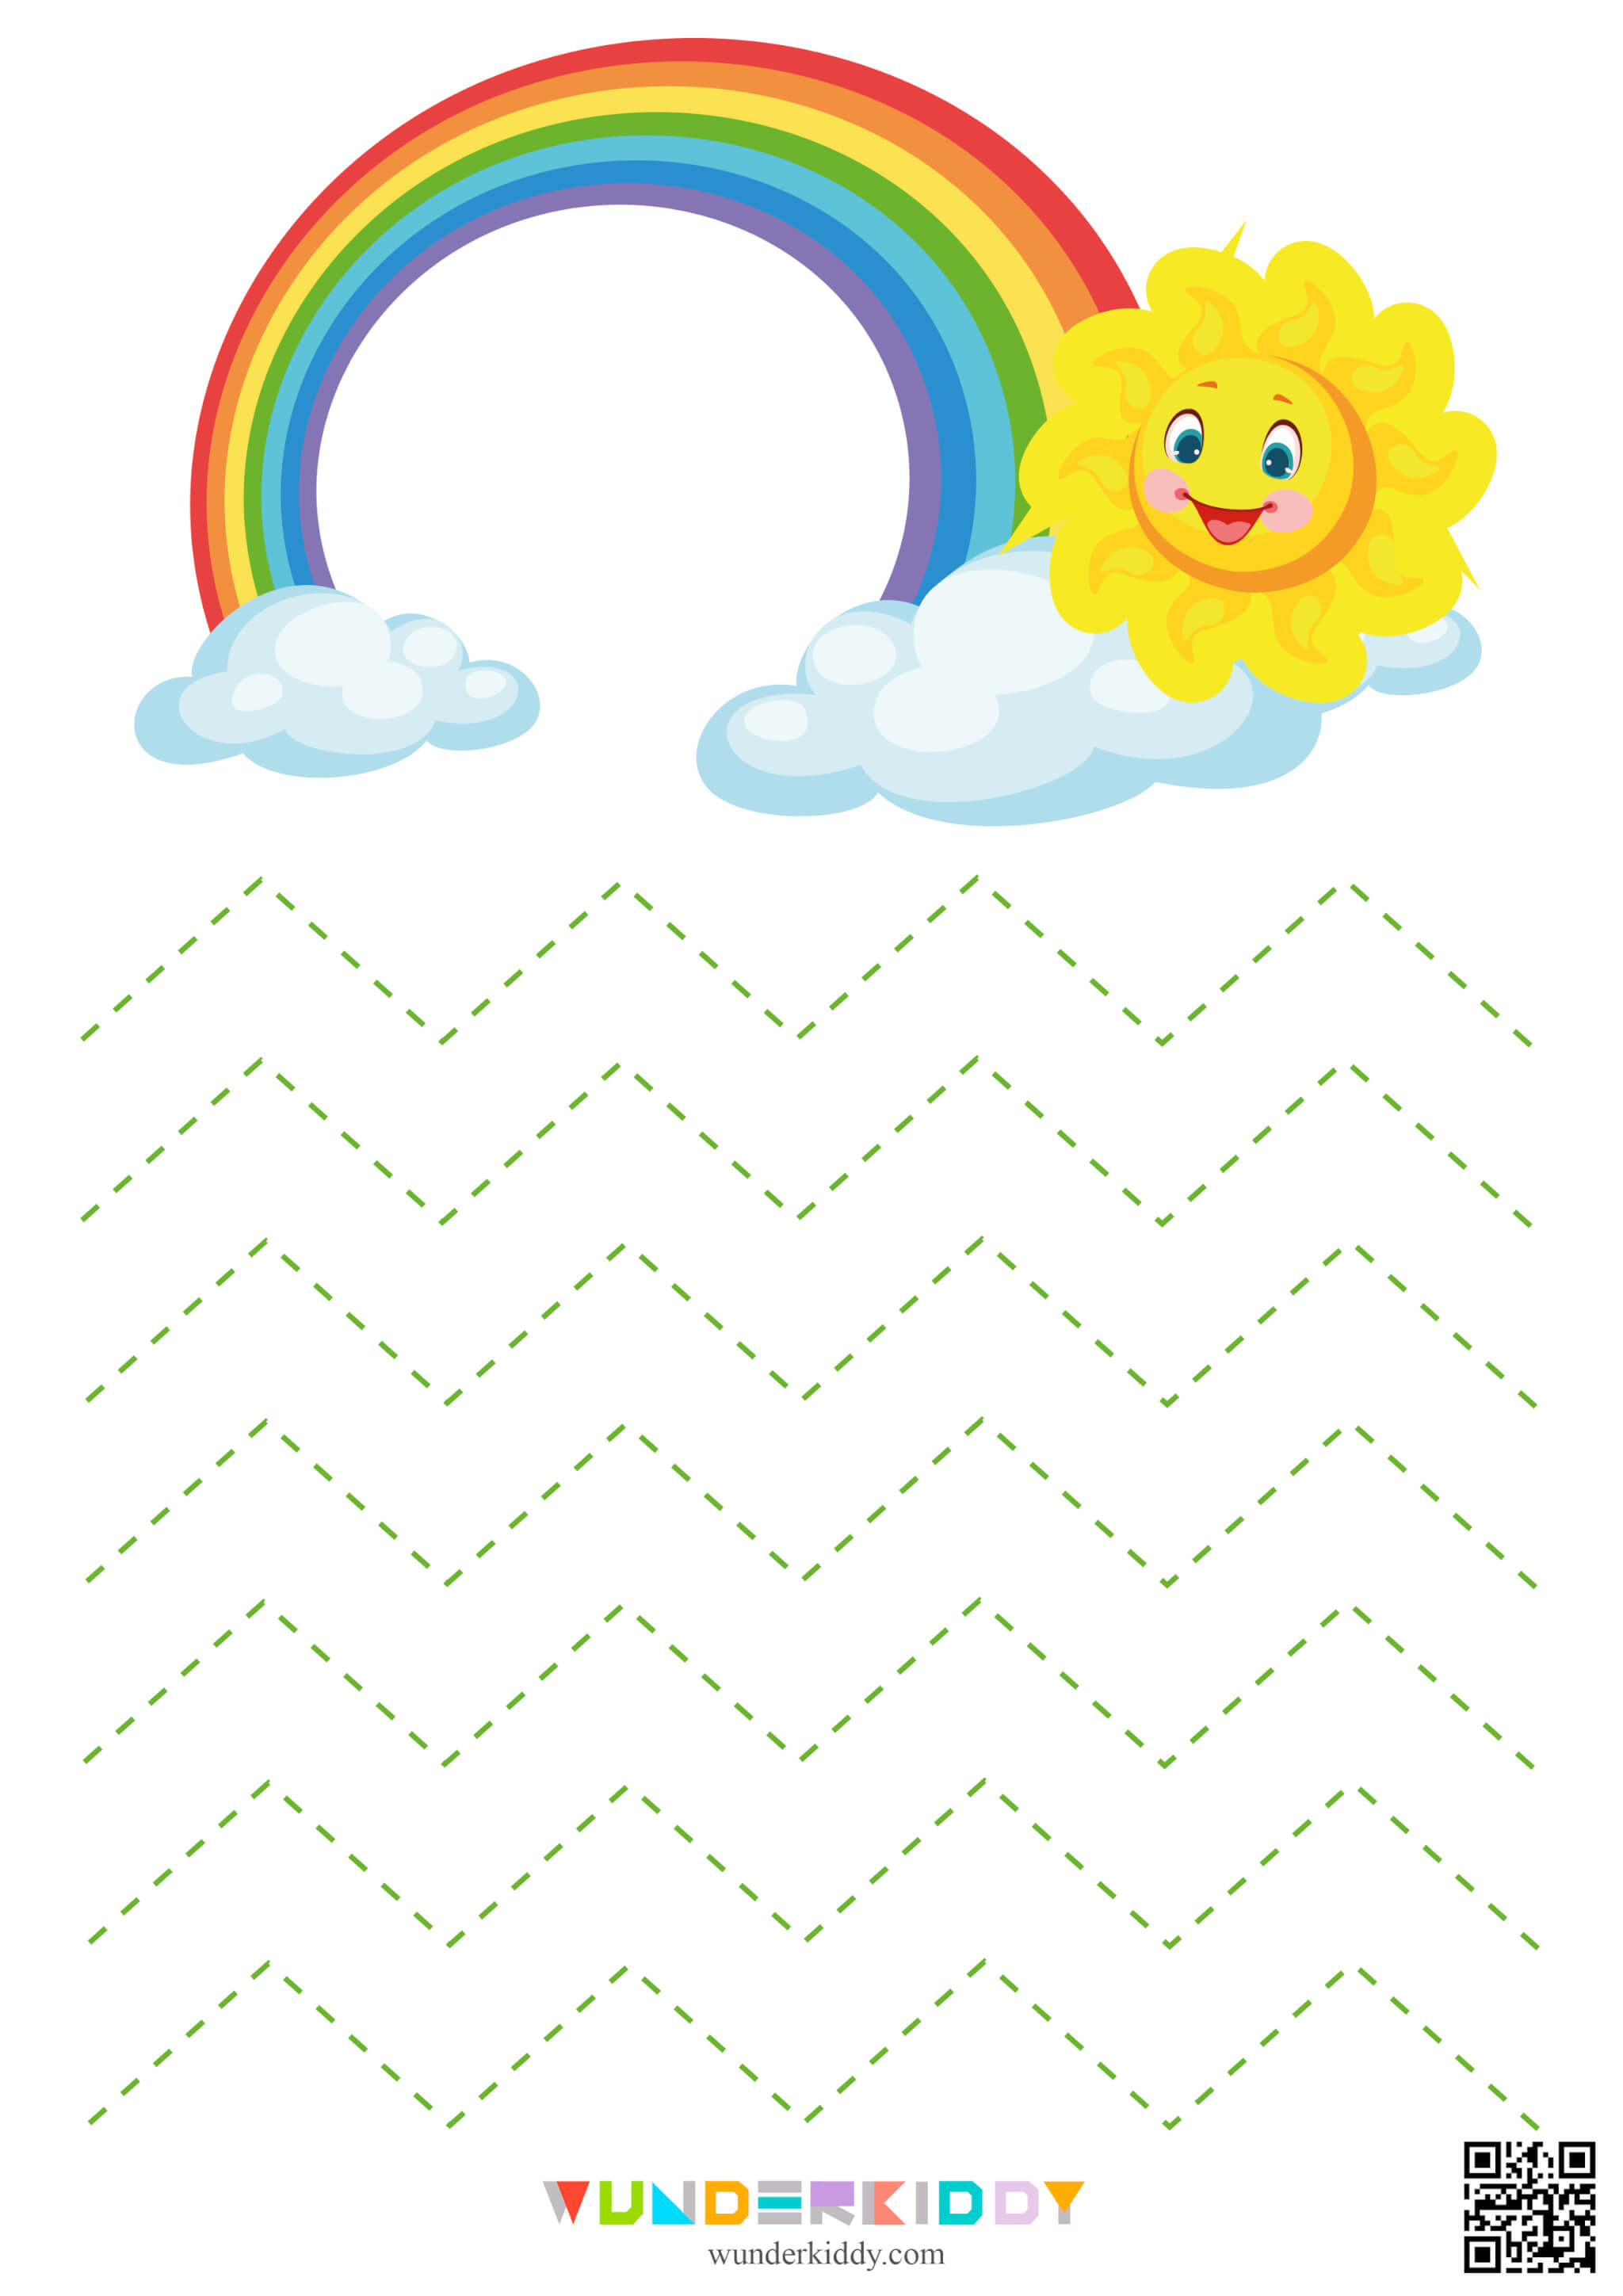 Worksheets «Sun and rainbow» - Image 4